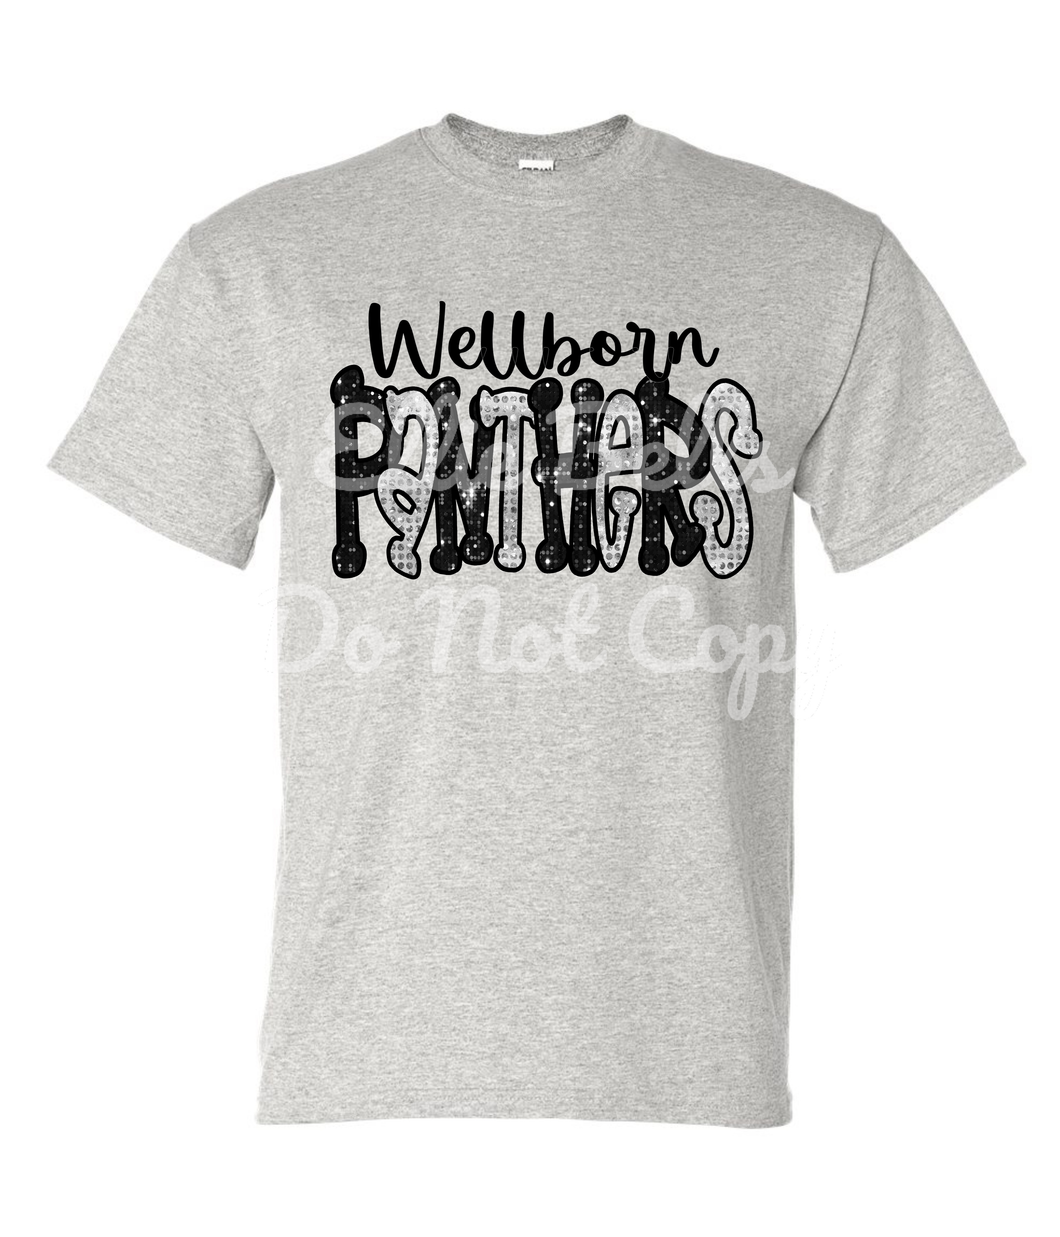 Wellborn Panthers Faux sequins tshirt